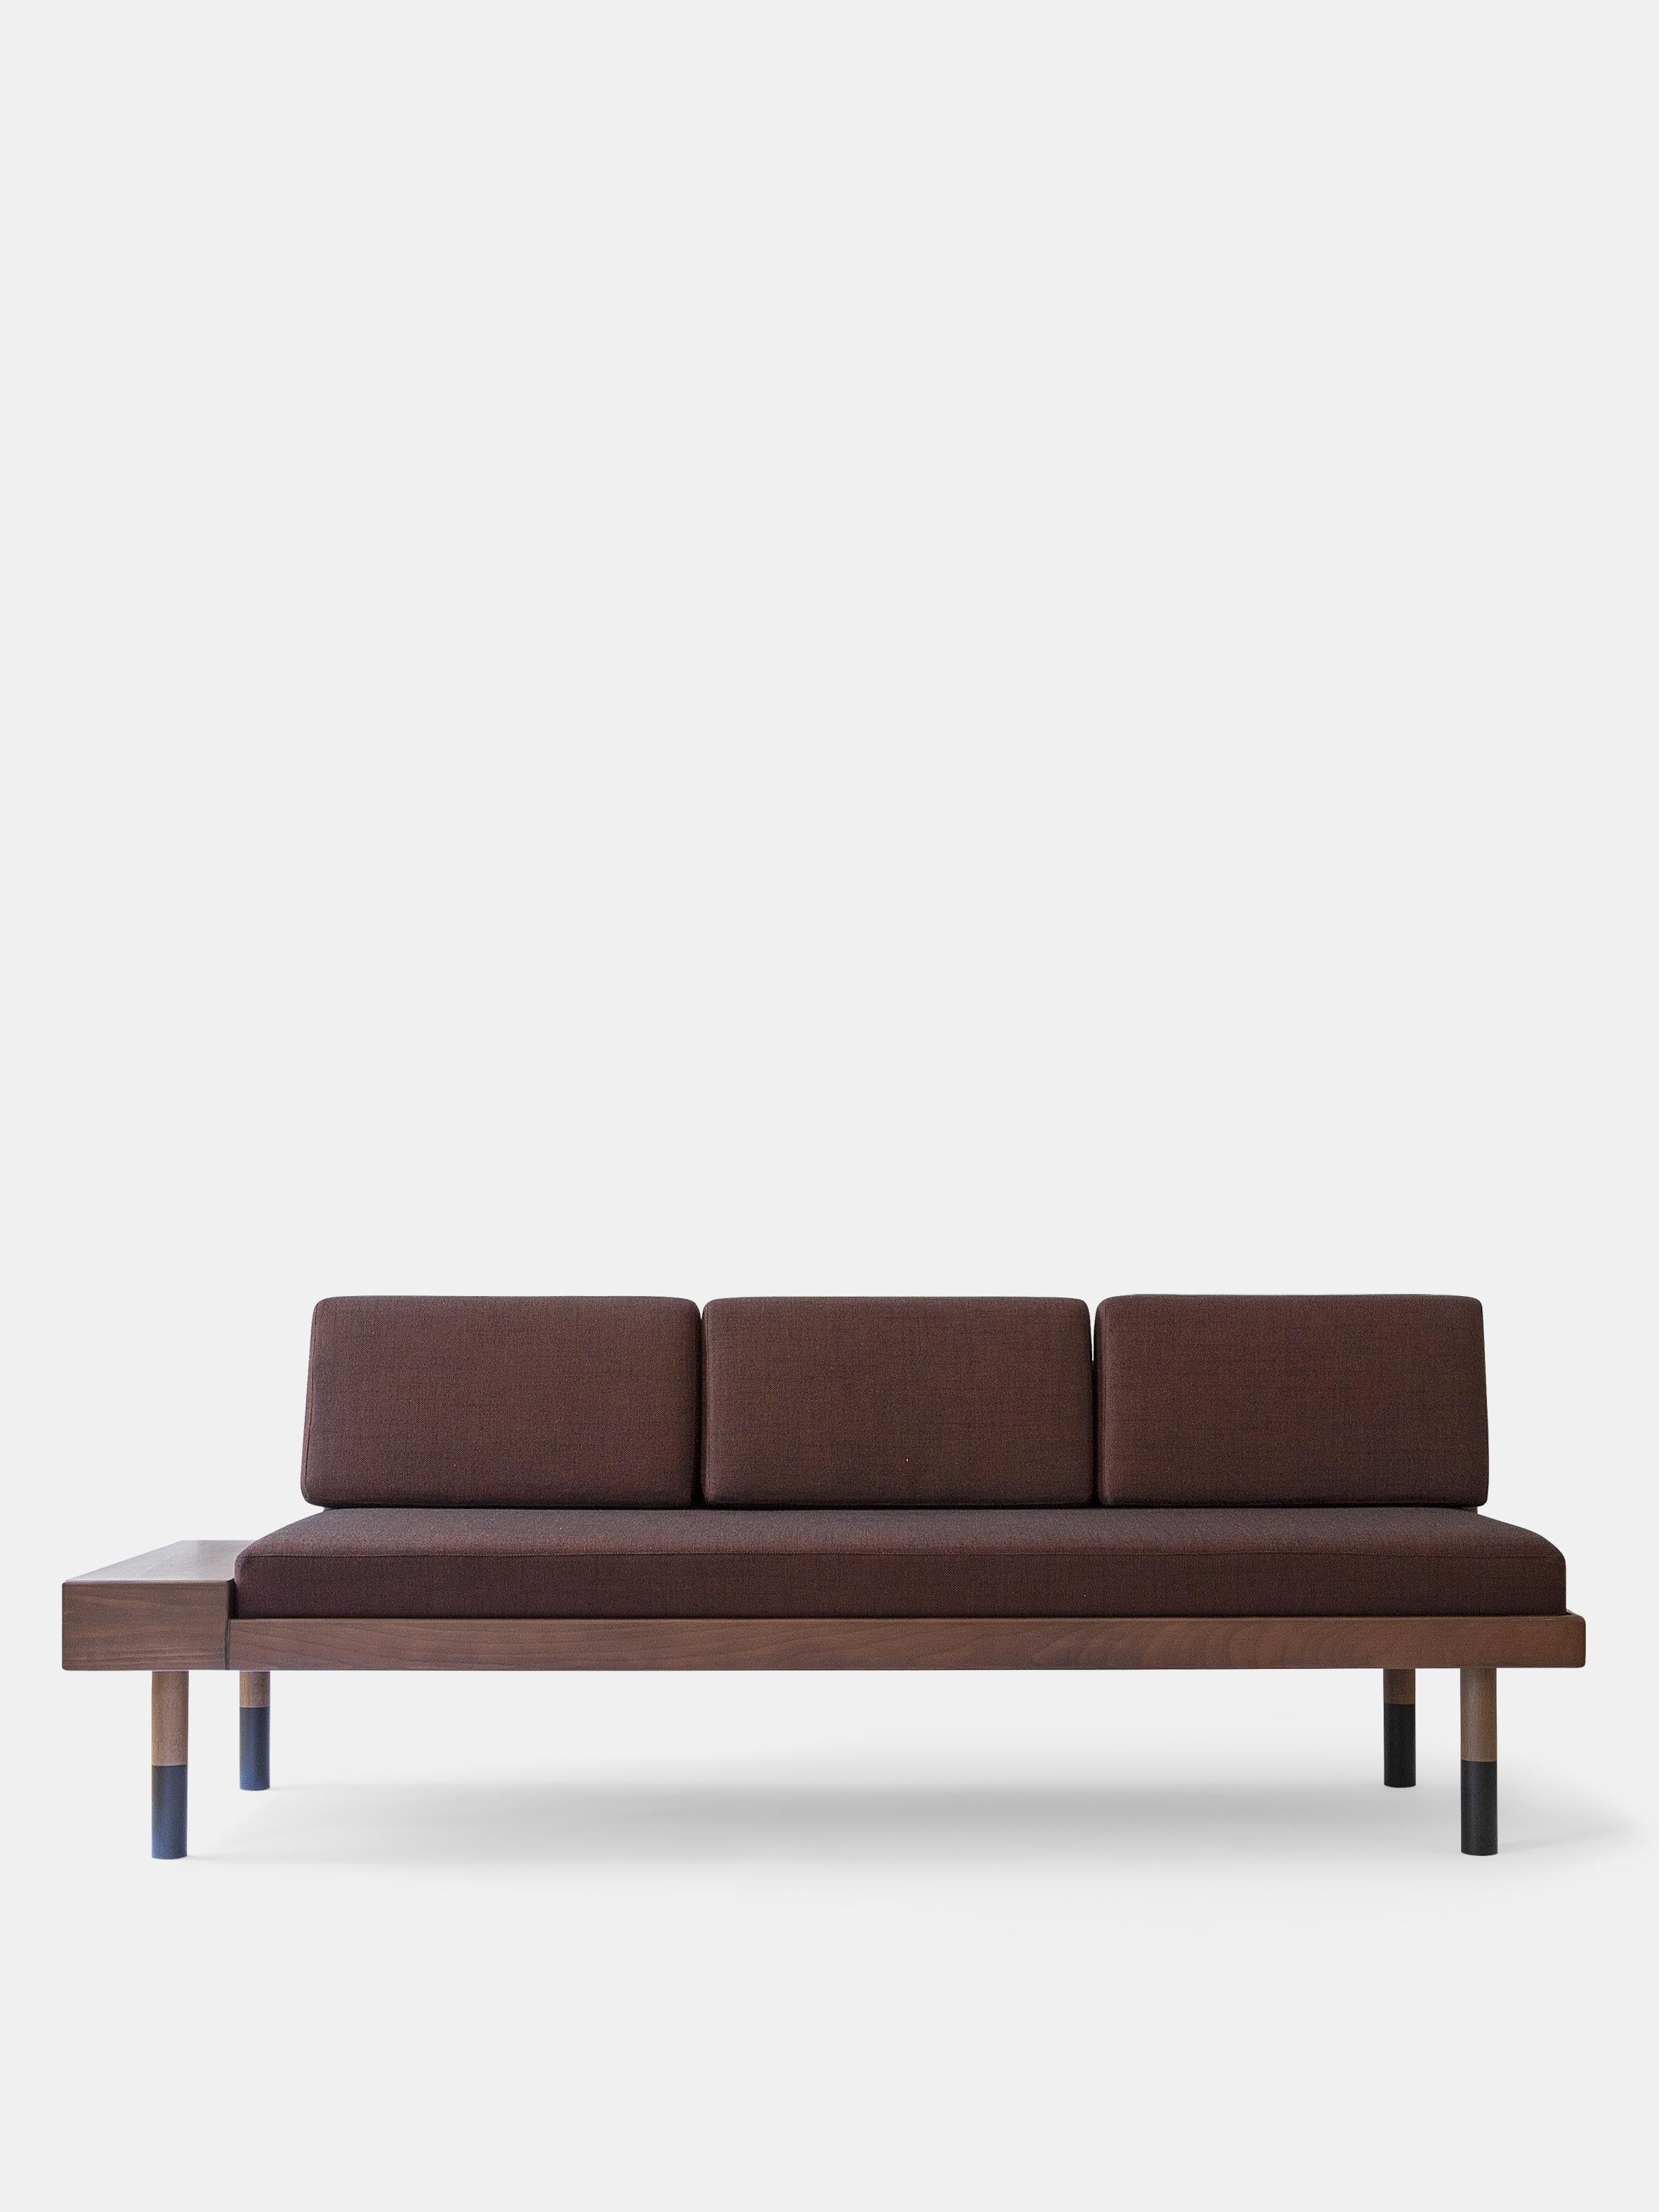 Burgundy Mid Sofa by Kann Design
Dimensions: D 70 x W 200 x H 74 cm.
Materials: Solid wood, steel, wood veneer, HR foam, fabric upholstery Kvadrat Sunniva 373 (58% wool, 25% viscose, 8% linen, 5% nylon, 4% polyester).
Available in other